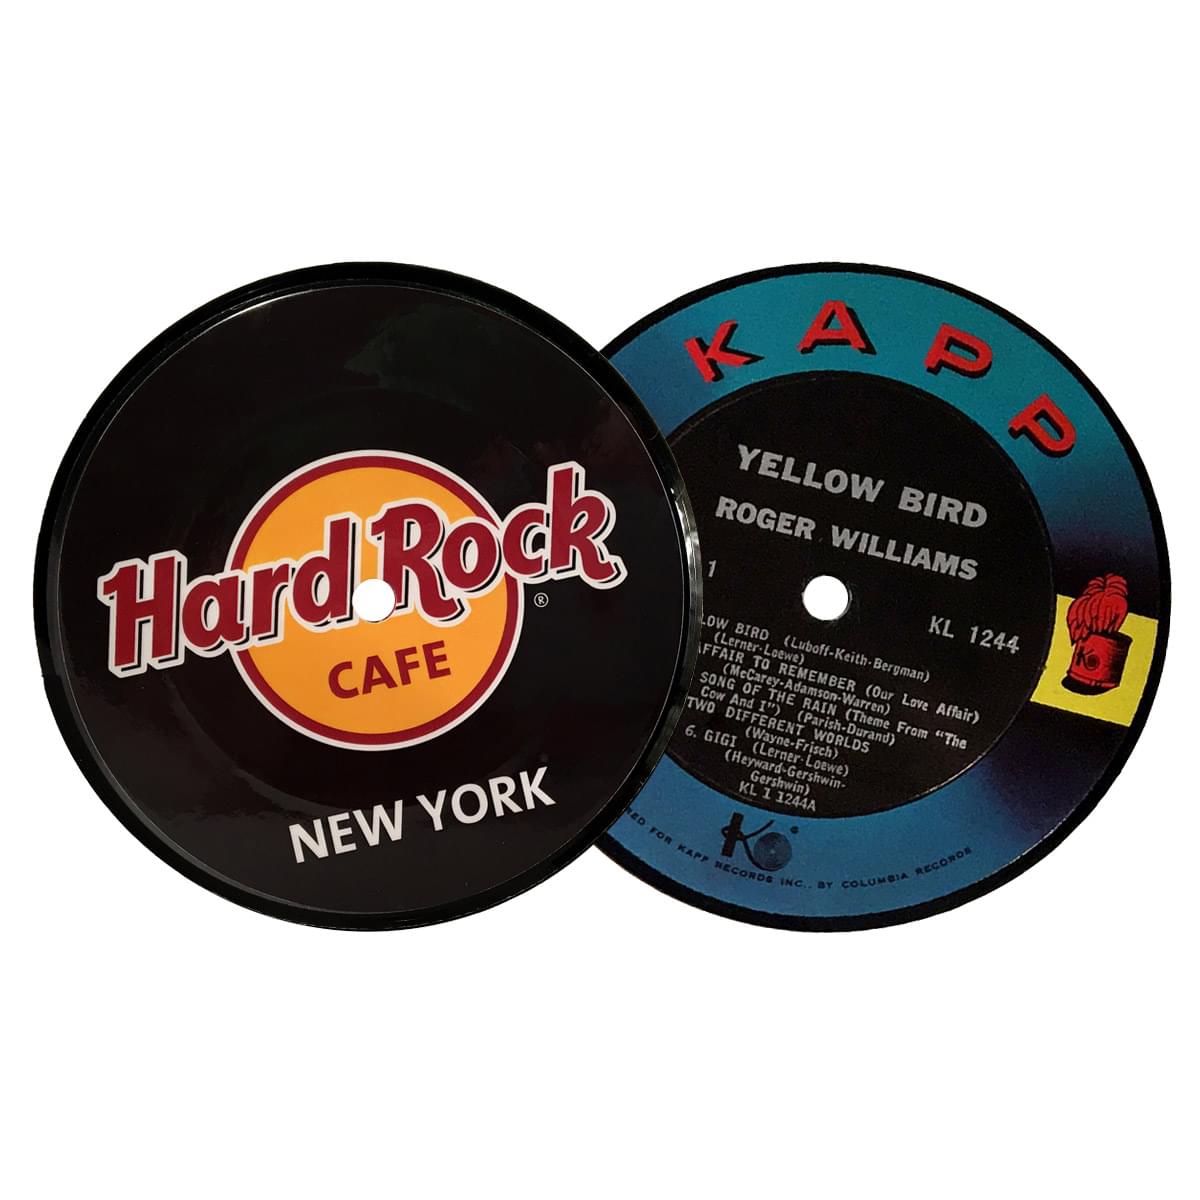 1-Sided Record Label Coasters - 1 Side Custom, 1 Side Vintage Record Labels - Bulk